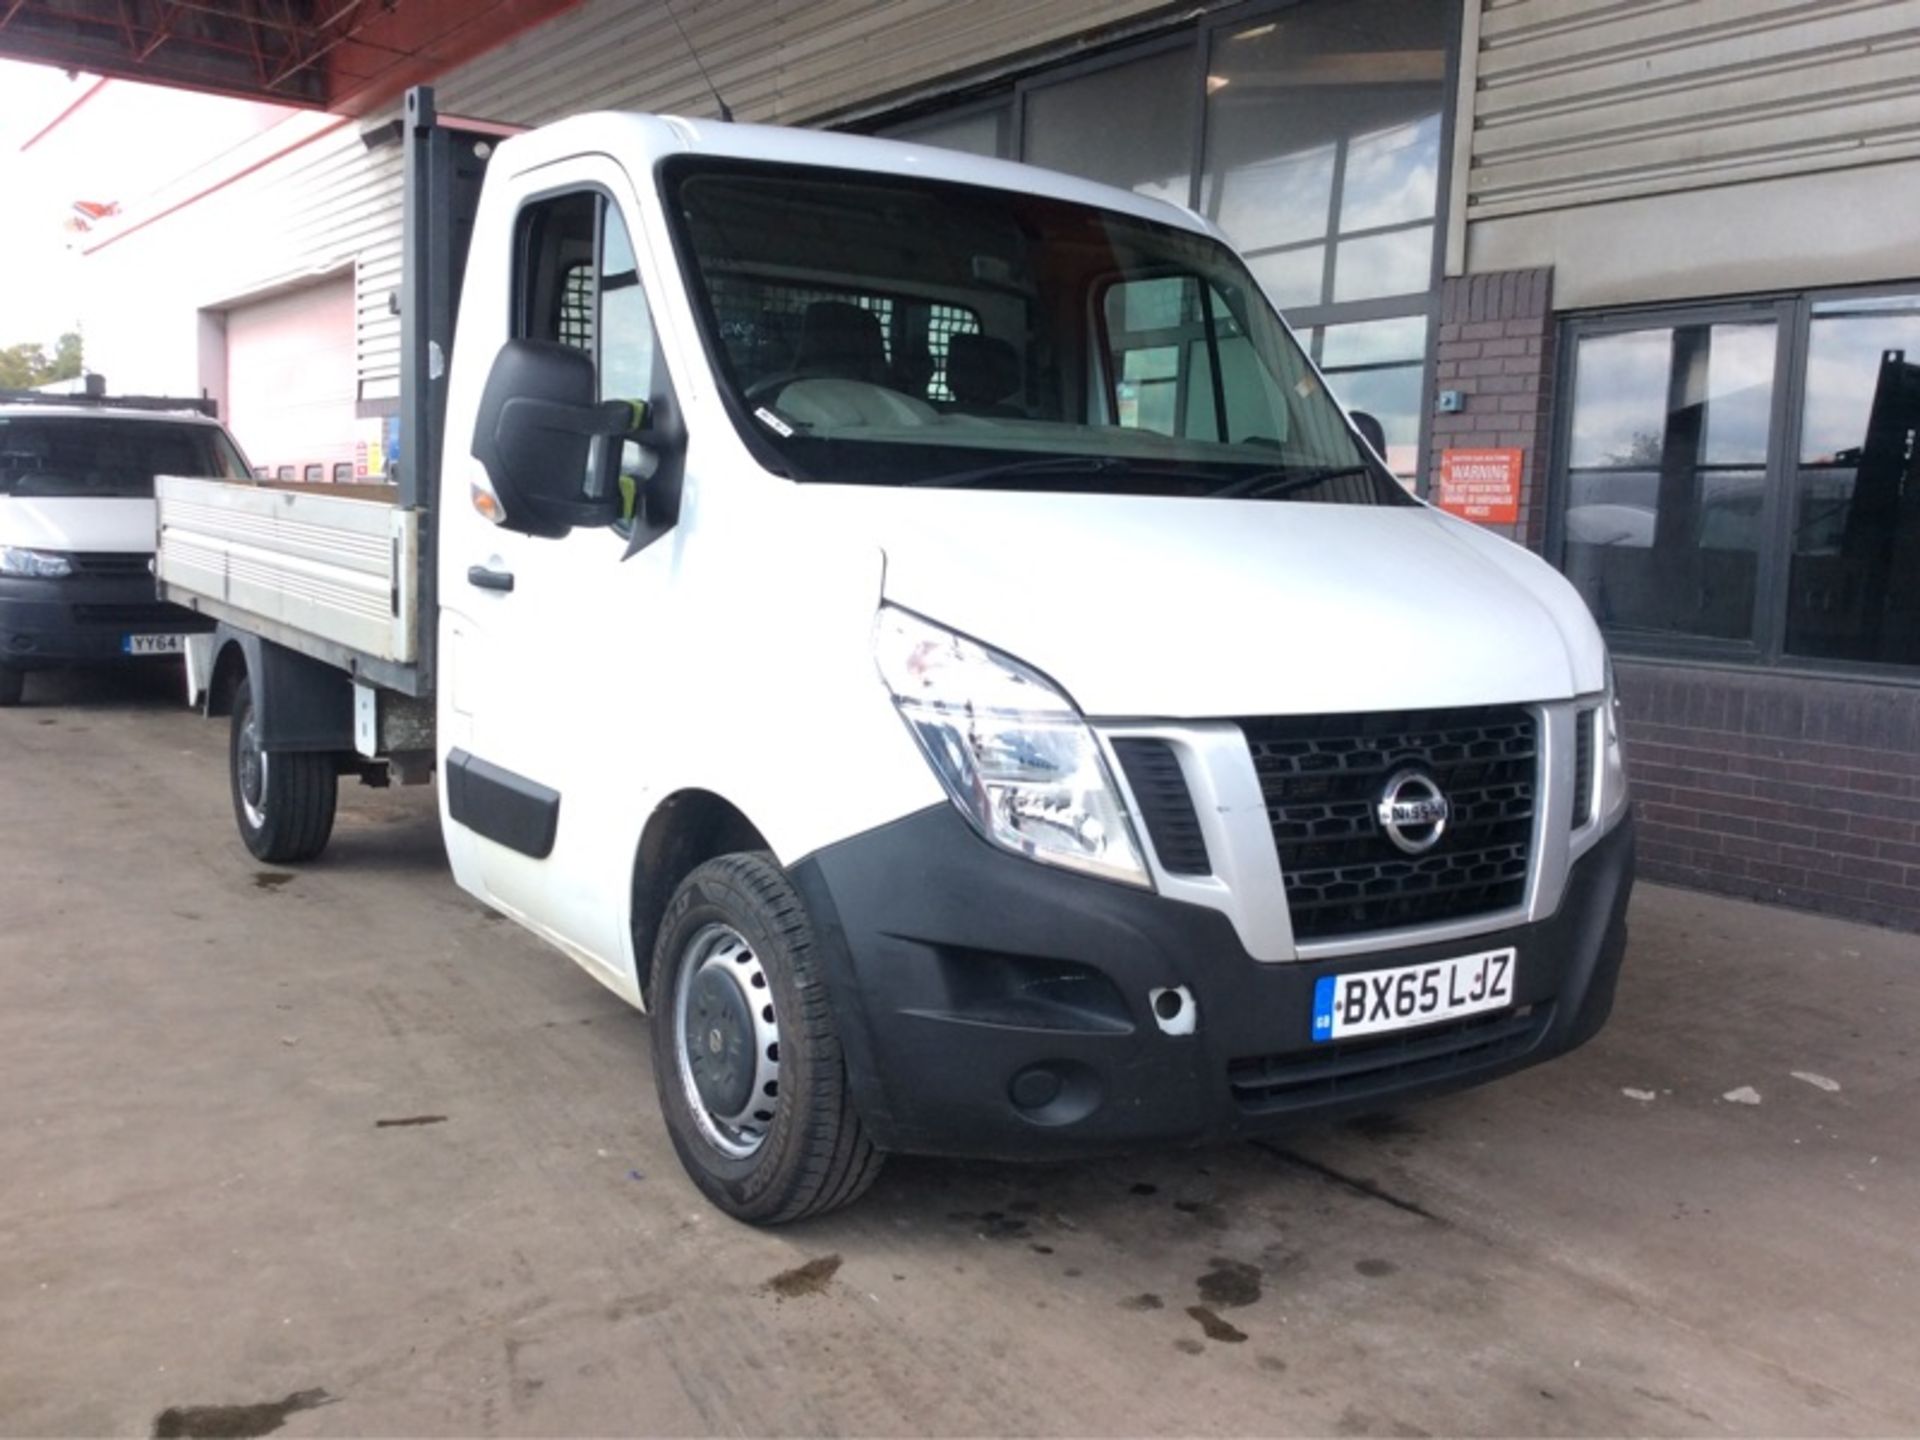 2015/65 REG NISSAN NV400 DCI E SHR 2.3 DIESEL WHITE DROPSIDE LORRY, SHOWING 0 FORMER KEEPERS - Image 2 of 8